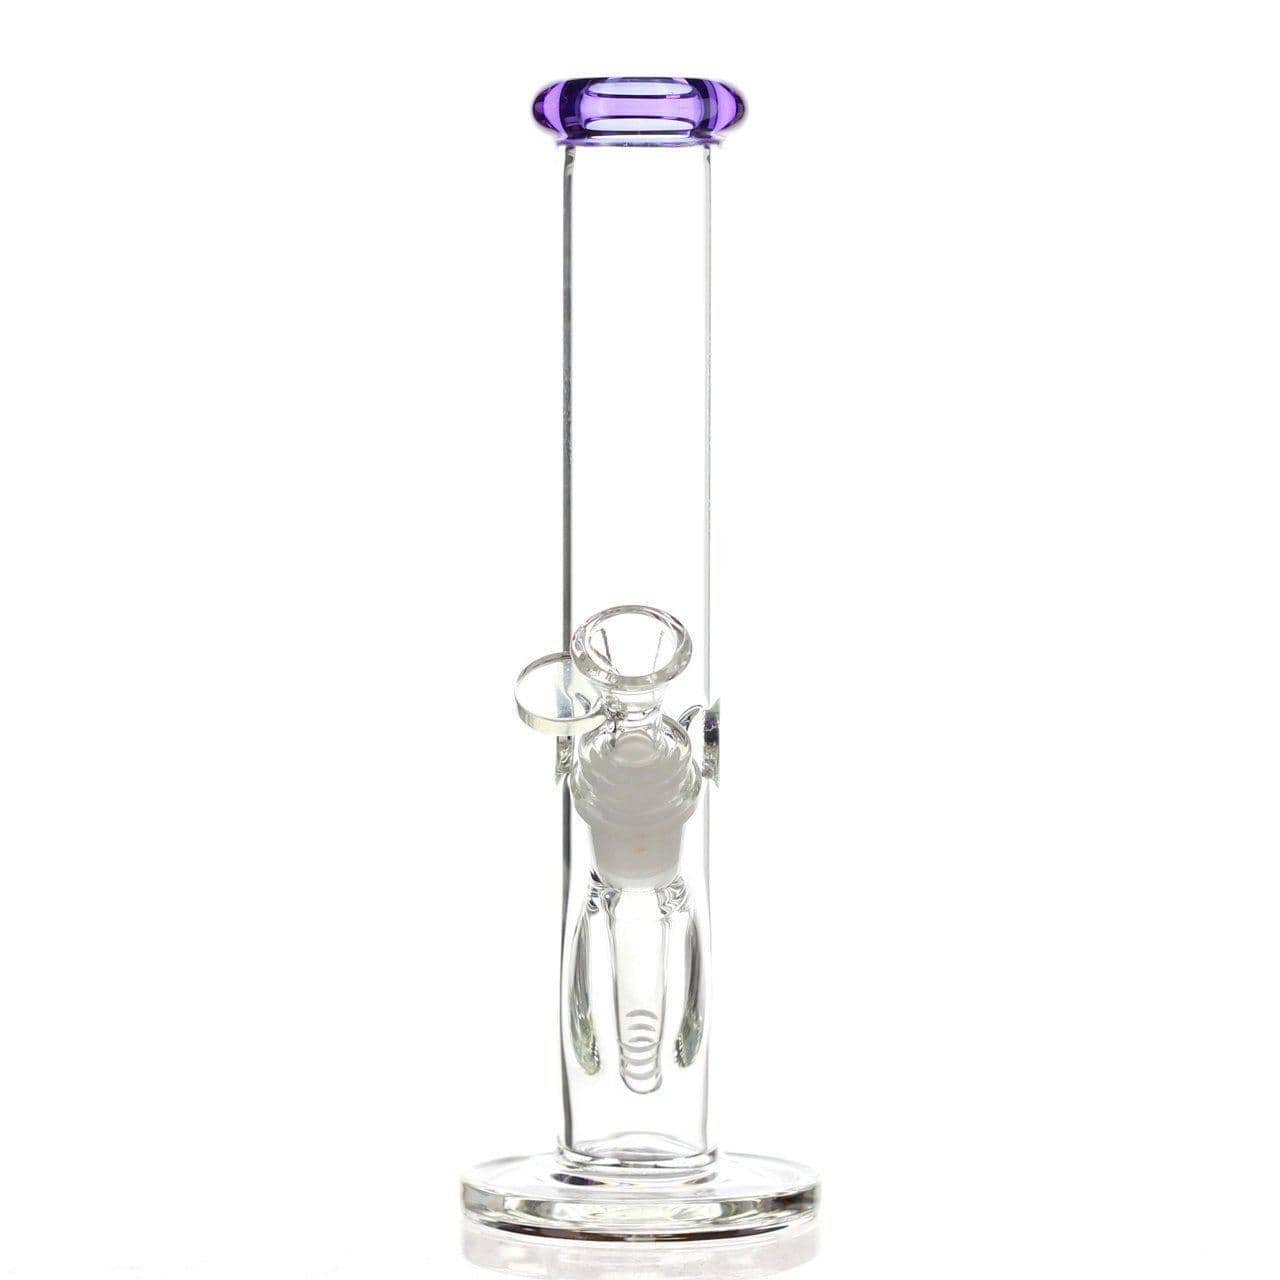 YNY Glass The Straight Shooter Bong